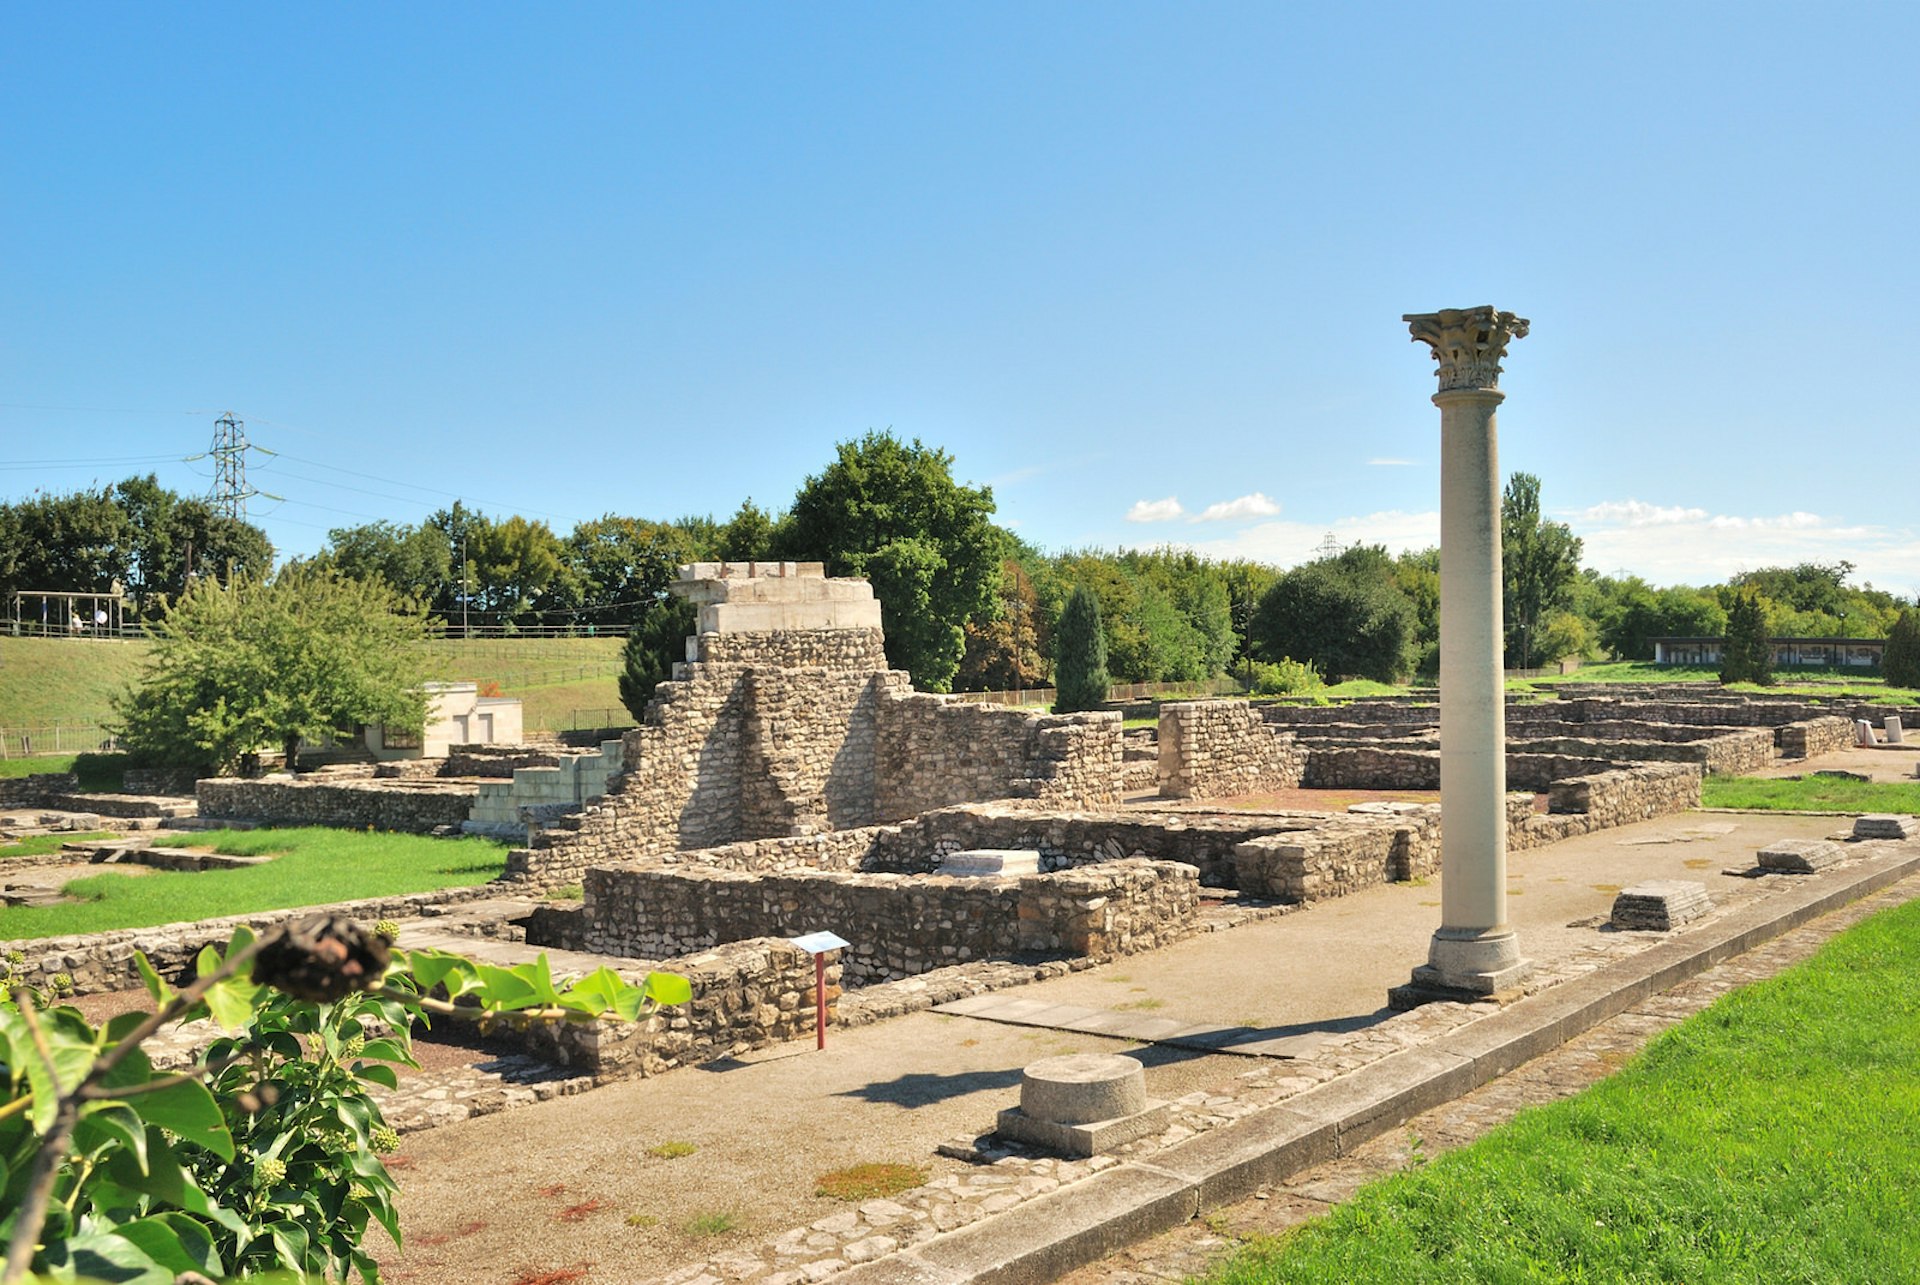 The ruins of the Aquincum Roman baths, a collection of small walls and pillars standing in a green field in Budapest, Hungary